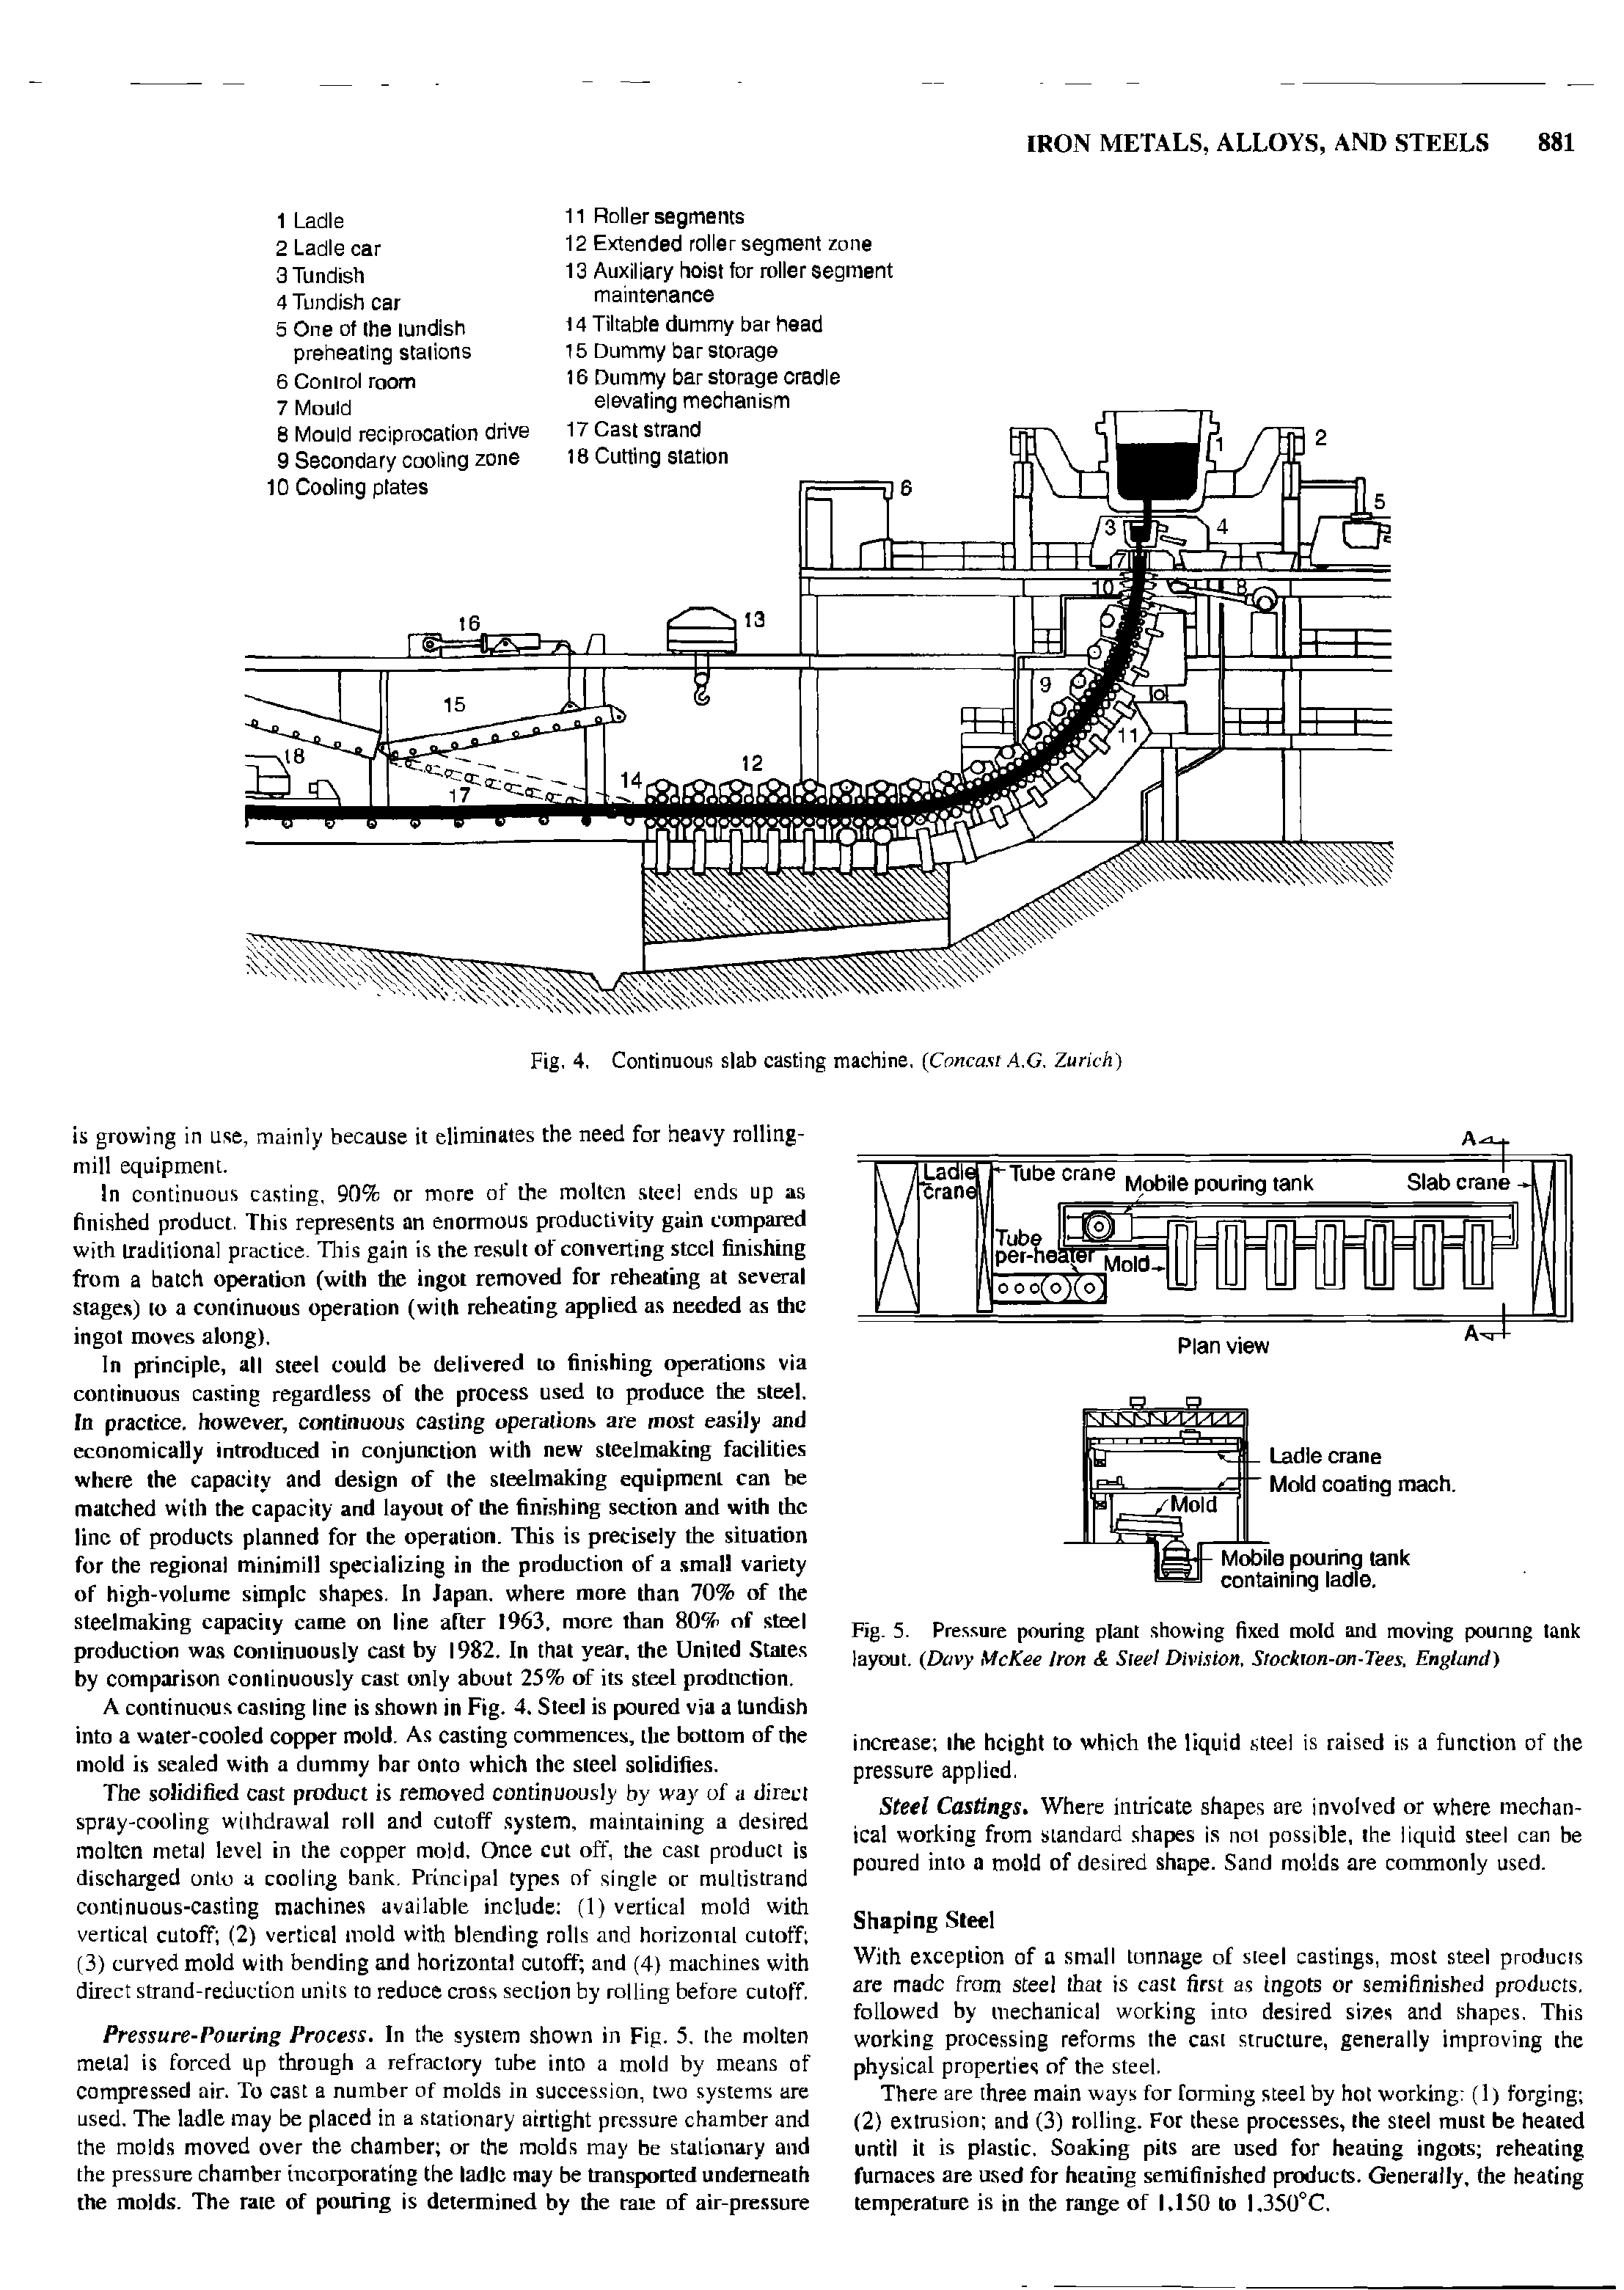 Fig. 5. Pressure pouring plant showing fixed mold and moving pouring tank layout. (Davy McKee Iron Sieel Division, Stockion-on-Tees, England)...